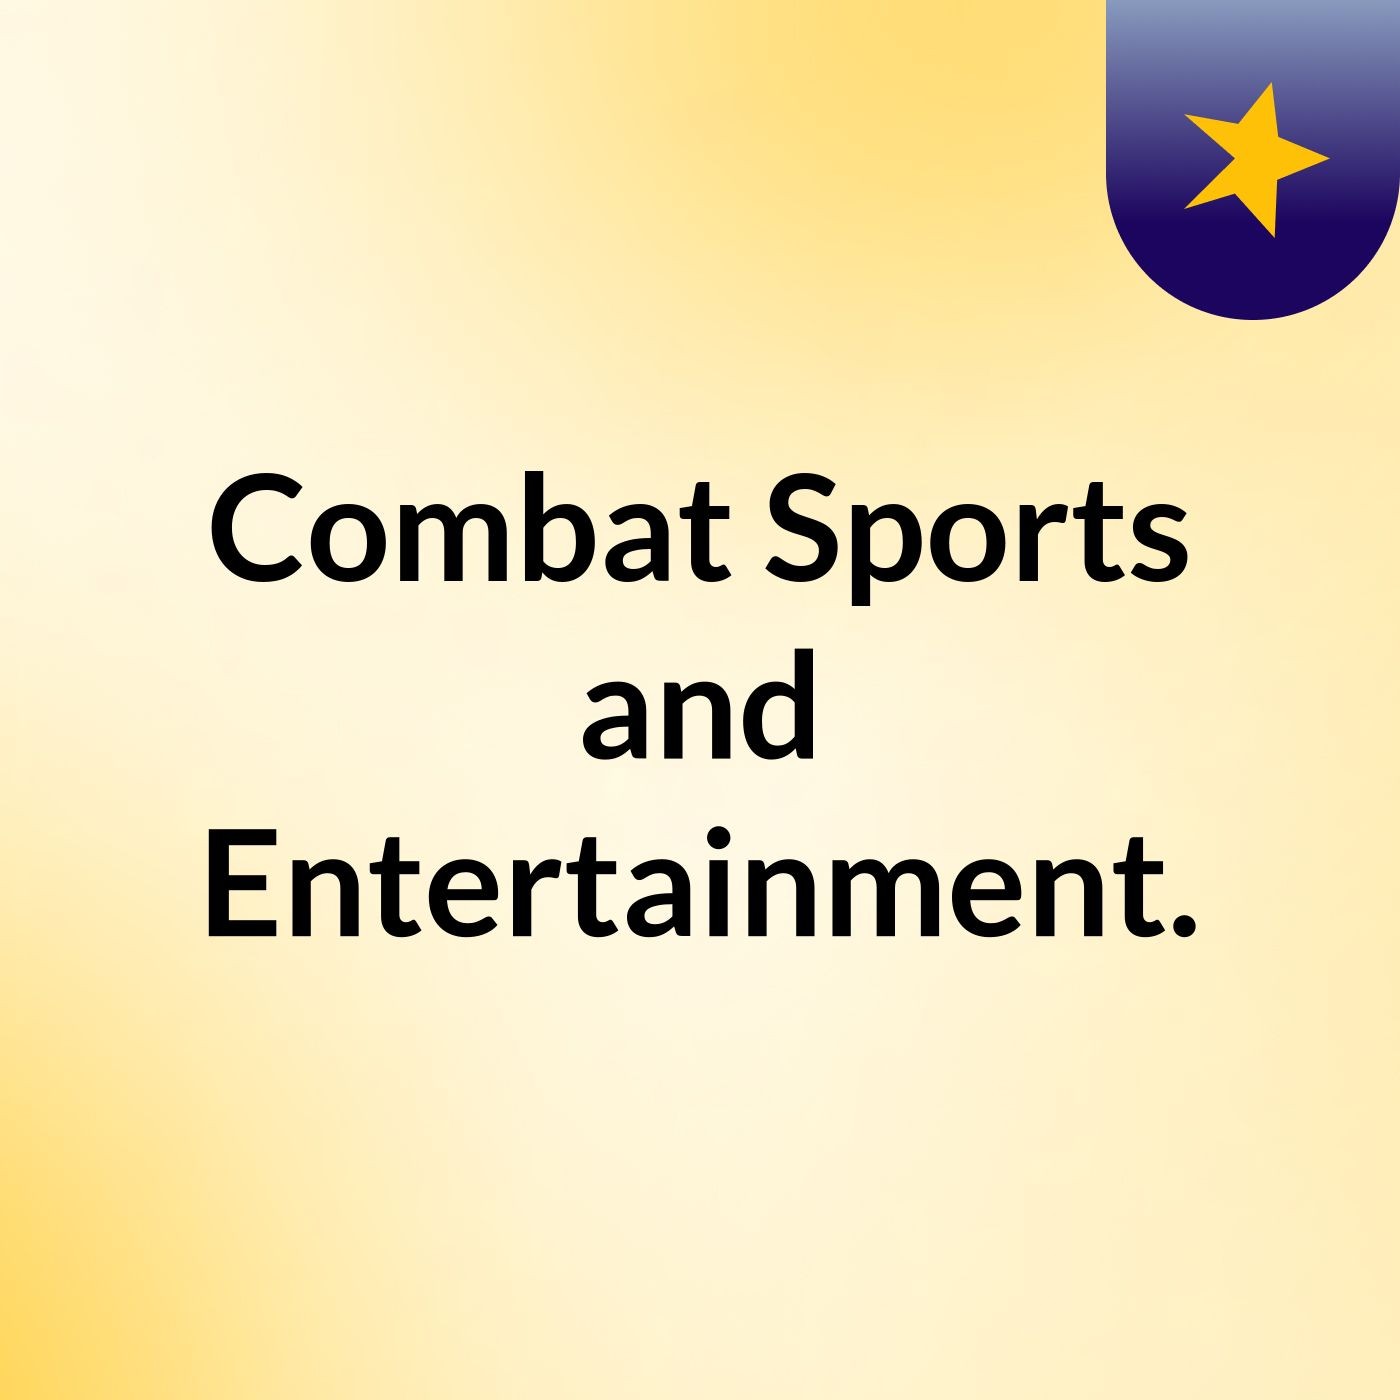 Combat Sports and Entertainment.